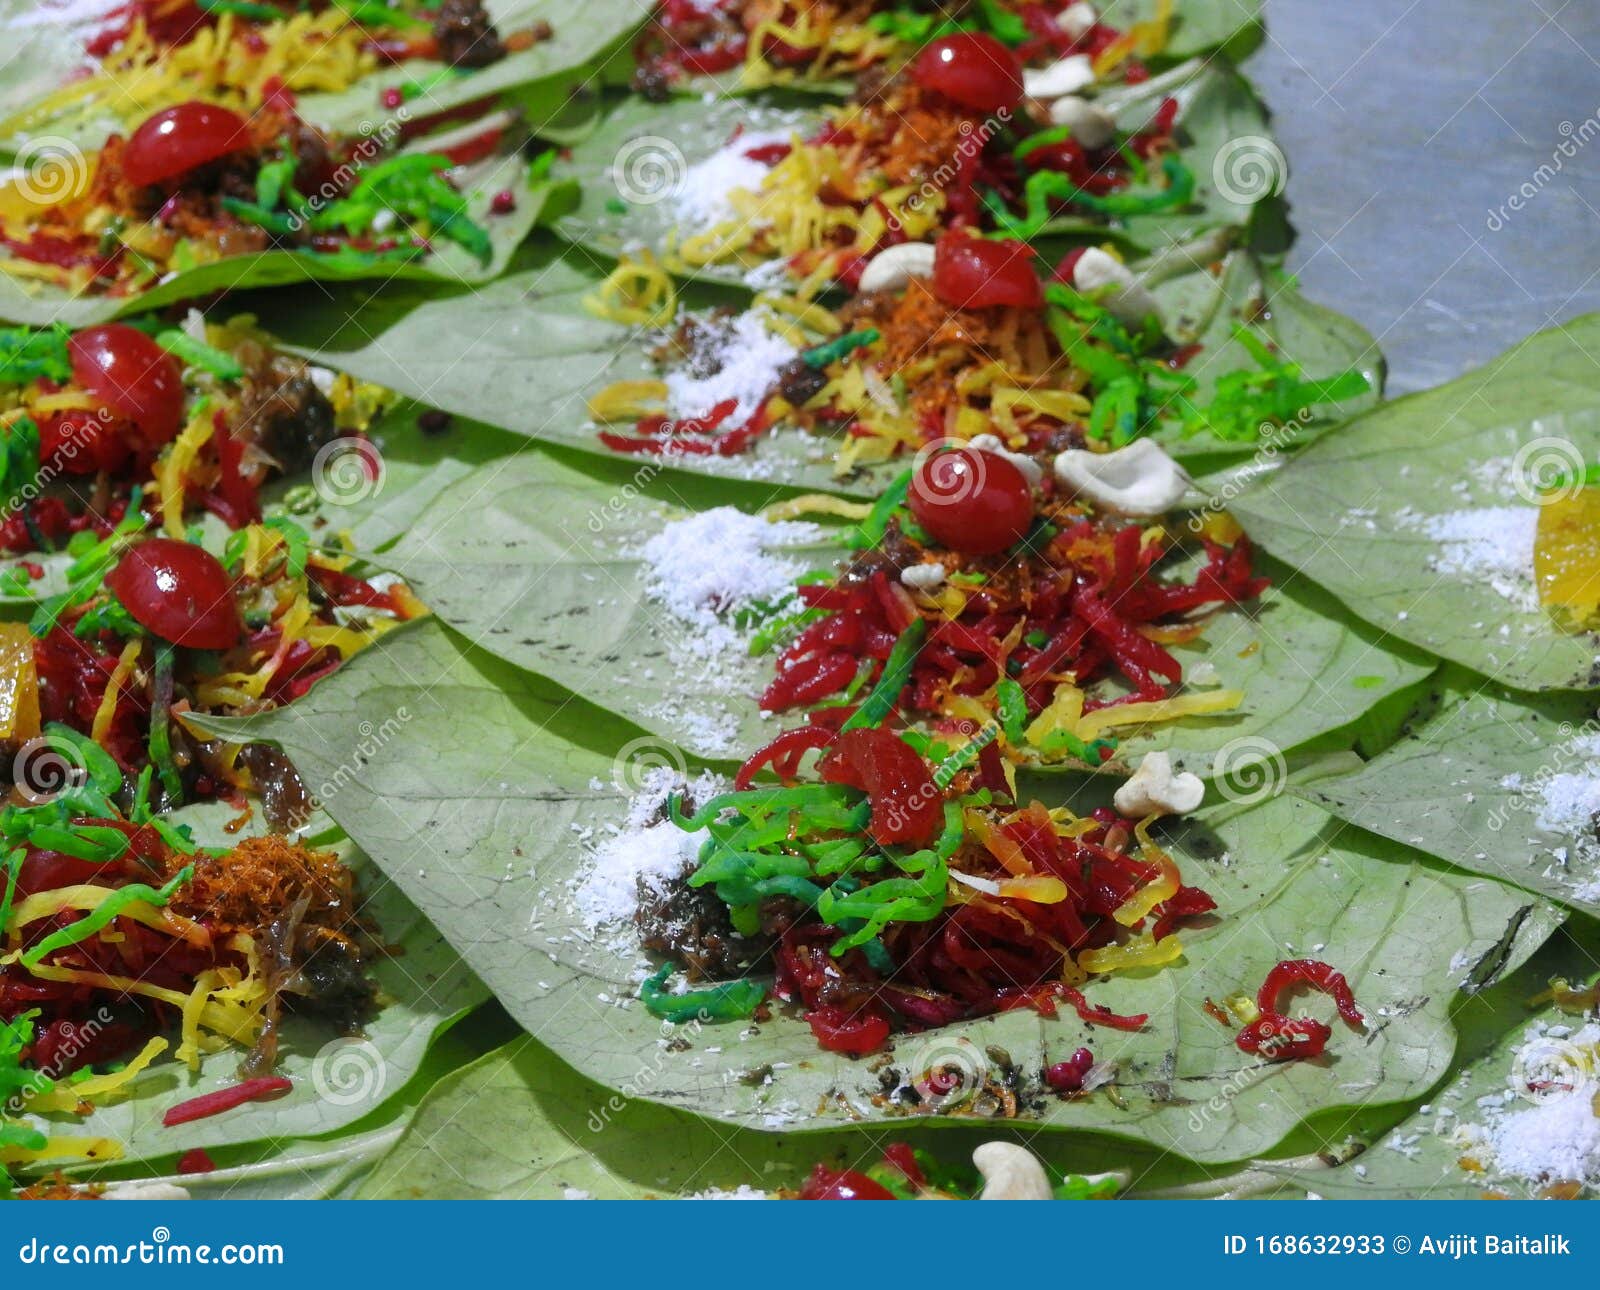 banarasi paan or betel leaf garnished with betel nut and all indian colorful banarasi ingredients for sale